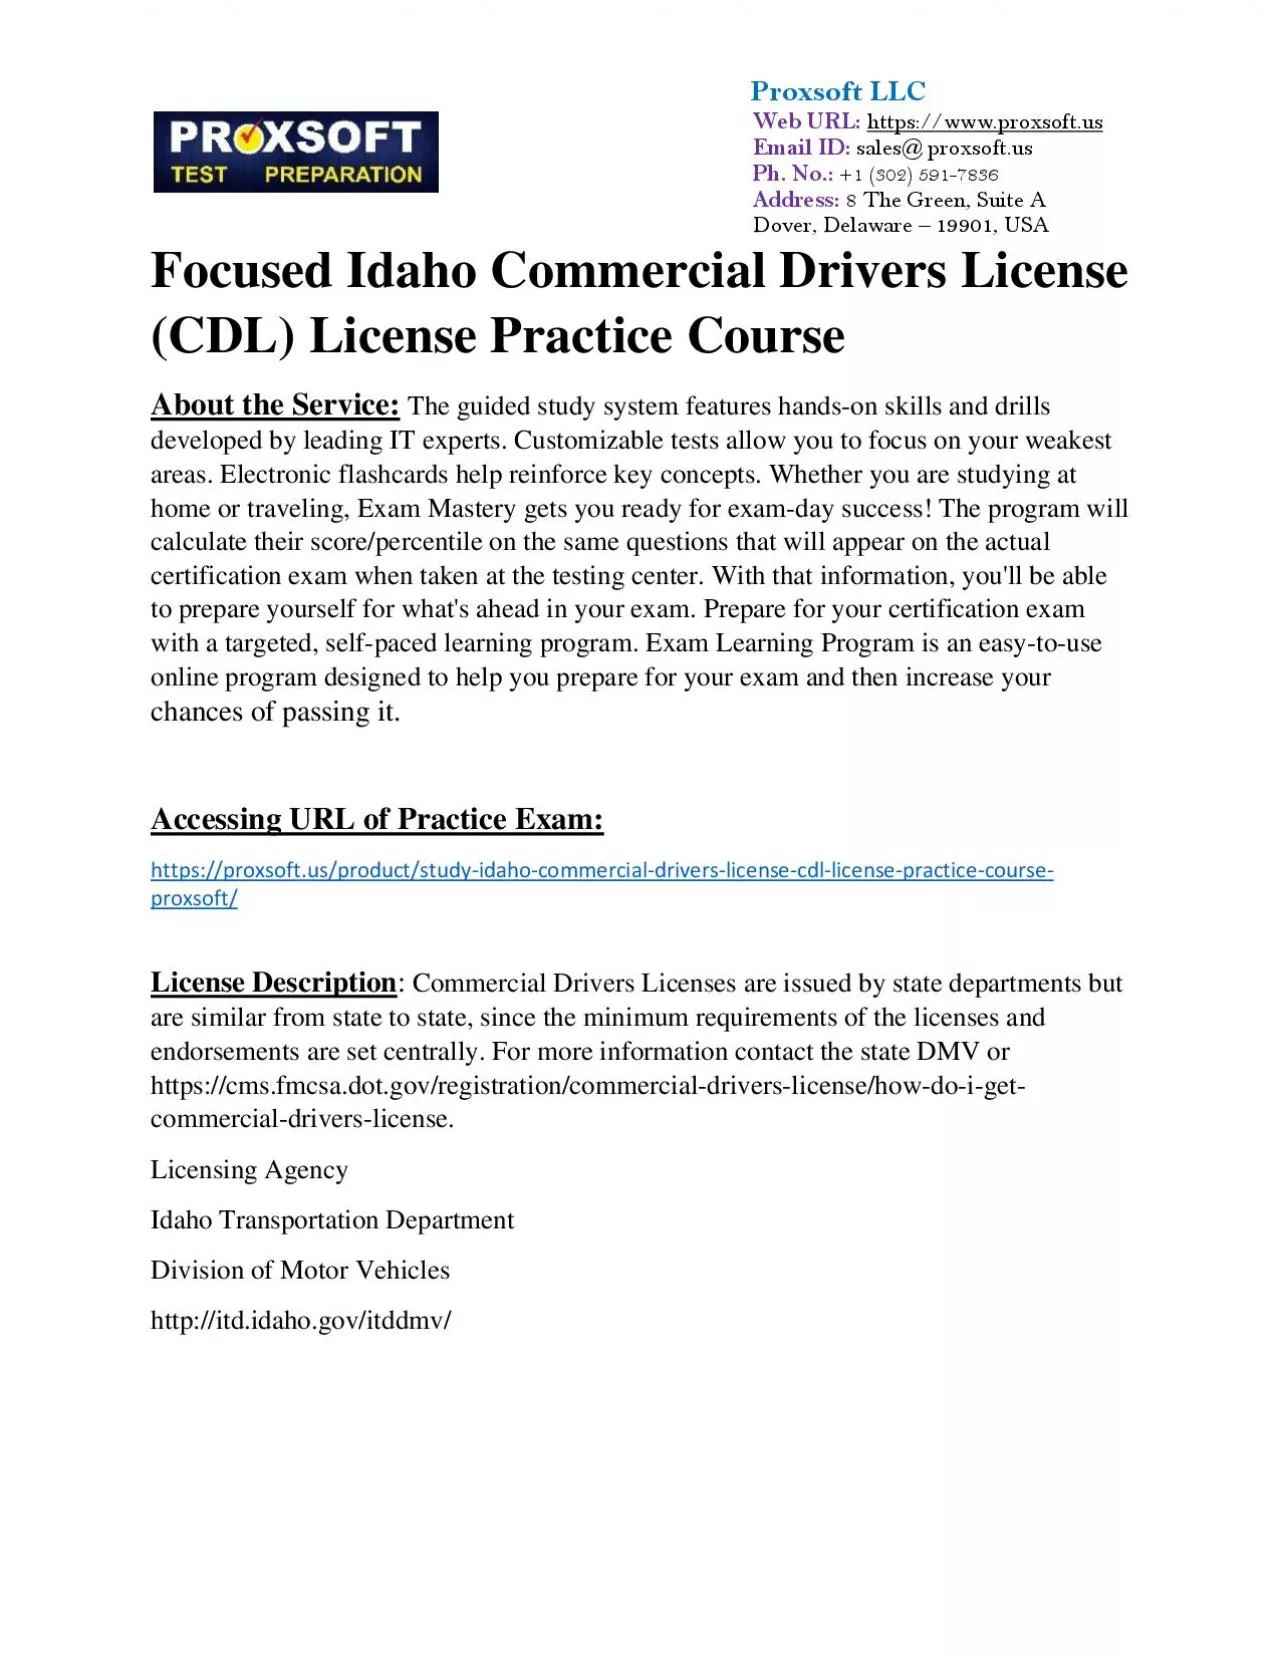 Focused Idaho Commercial Drivers License (CDL) License Practice Course